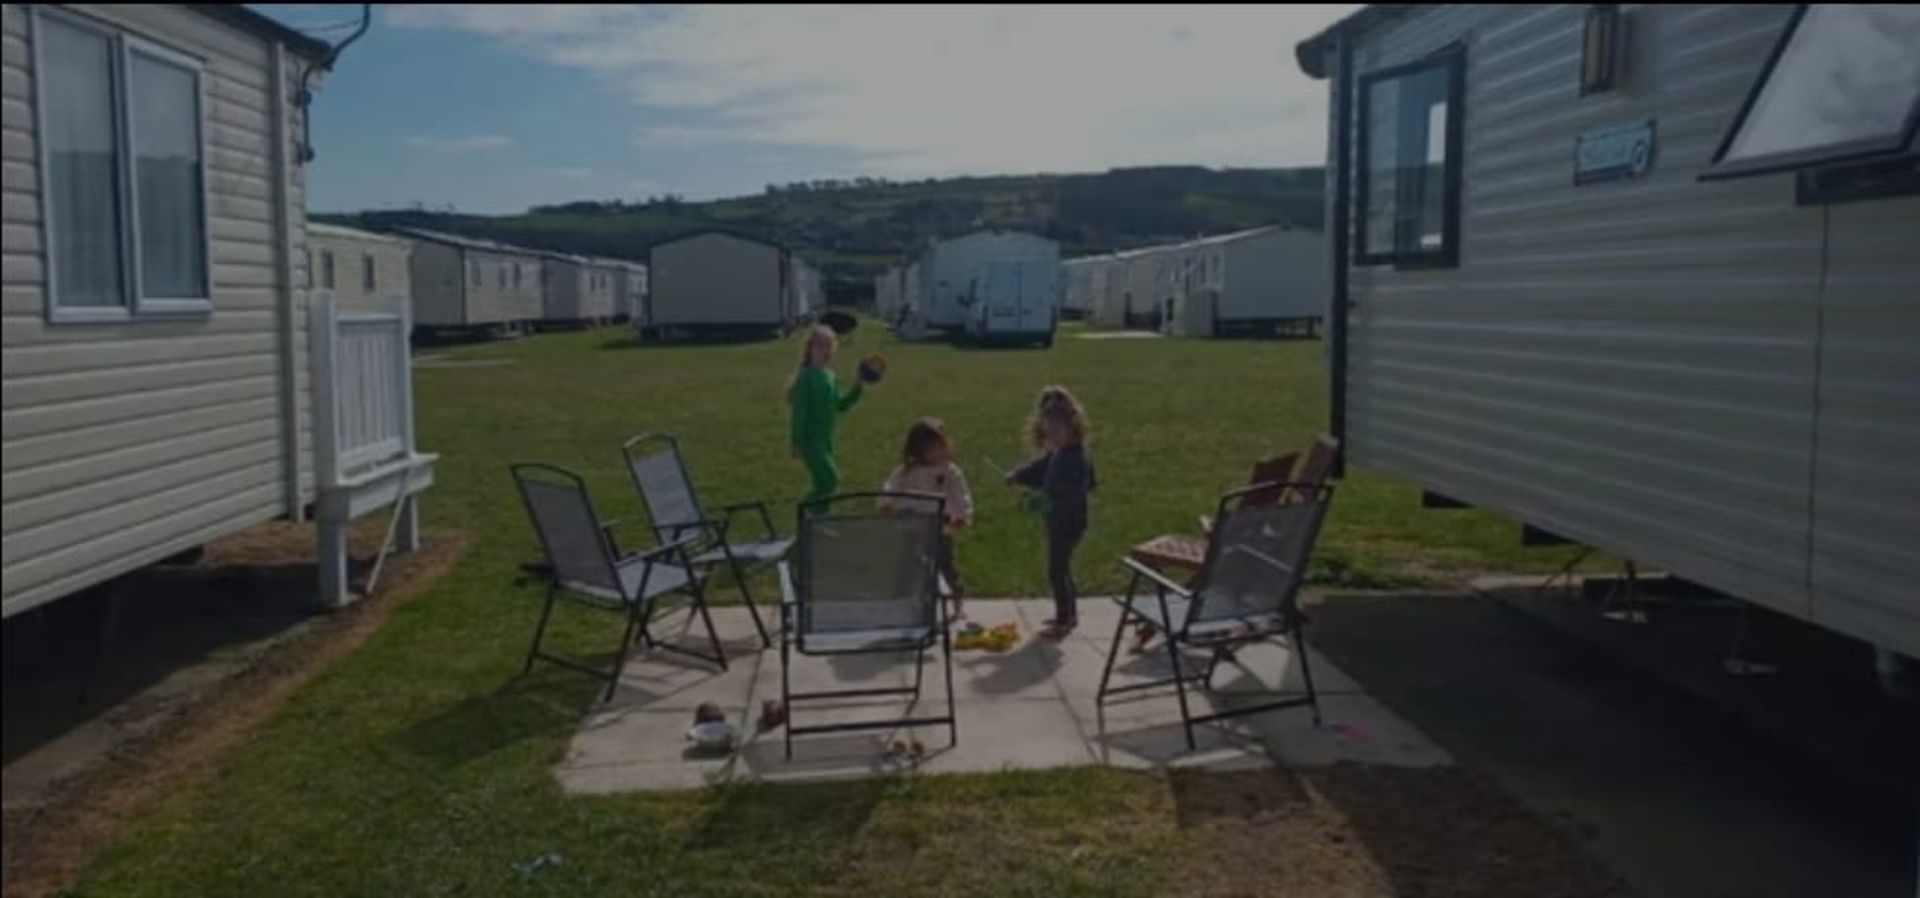 2015 WILLERBY ECO SALSA 3 BEDROOM holiday home ON-SITE SALE. - Image 12 of 13